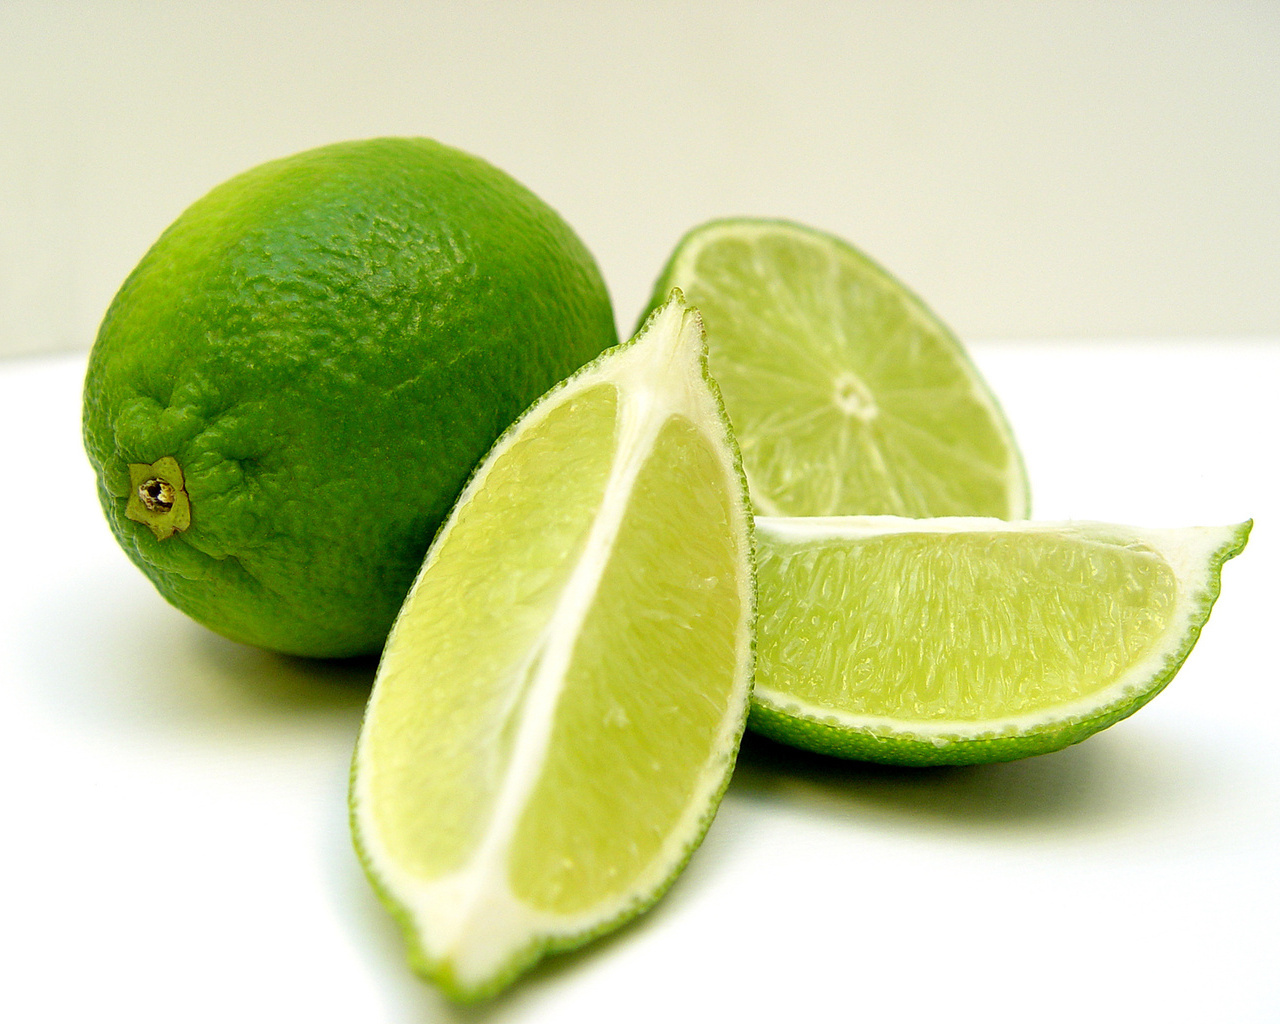 5 Amazing Anti-Aging Health Benefits Of Lime (Plus A Lime Recipe You Should Try) - The Trent